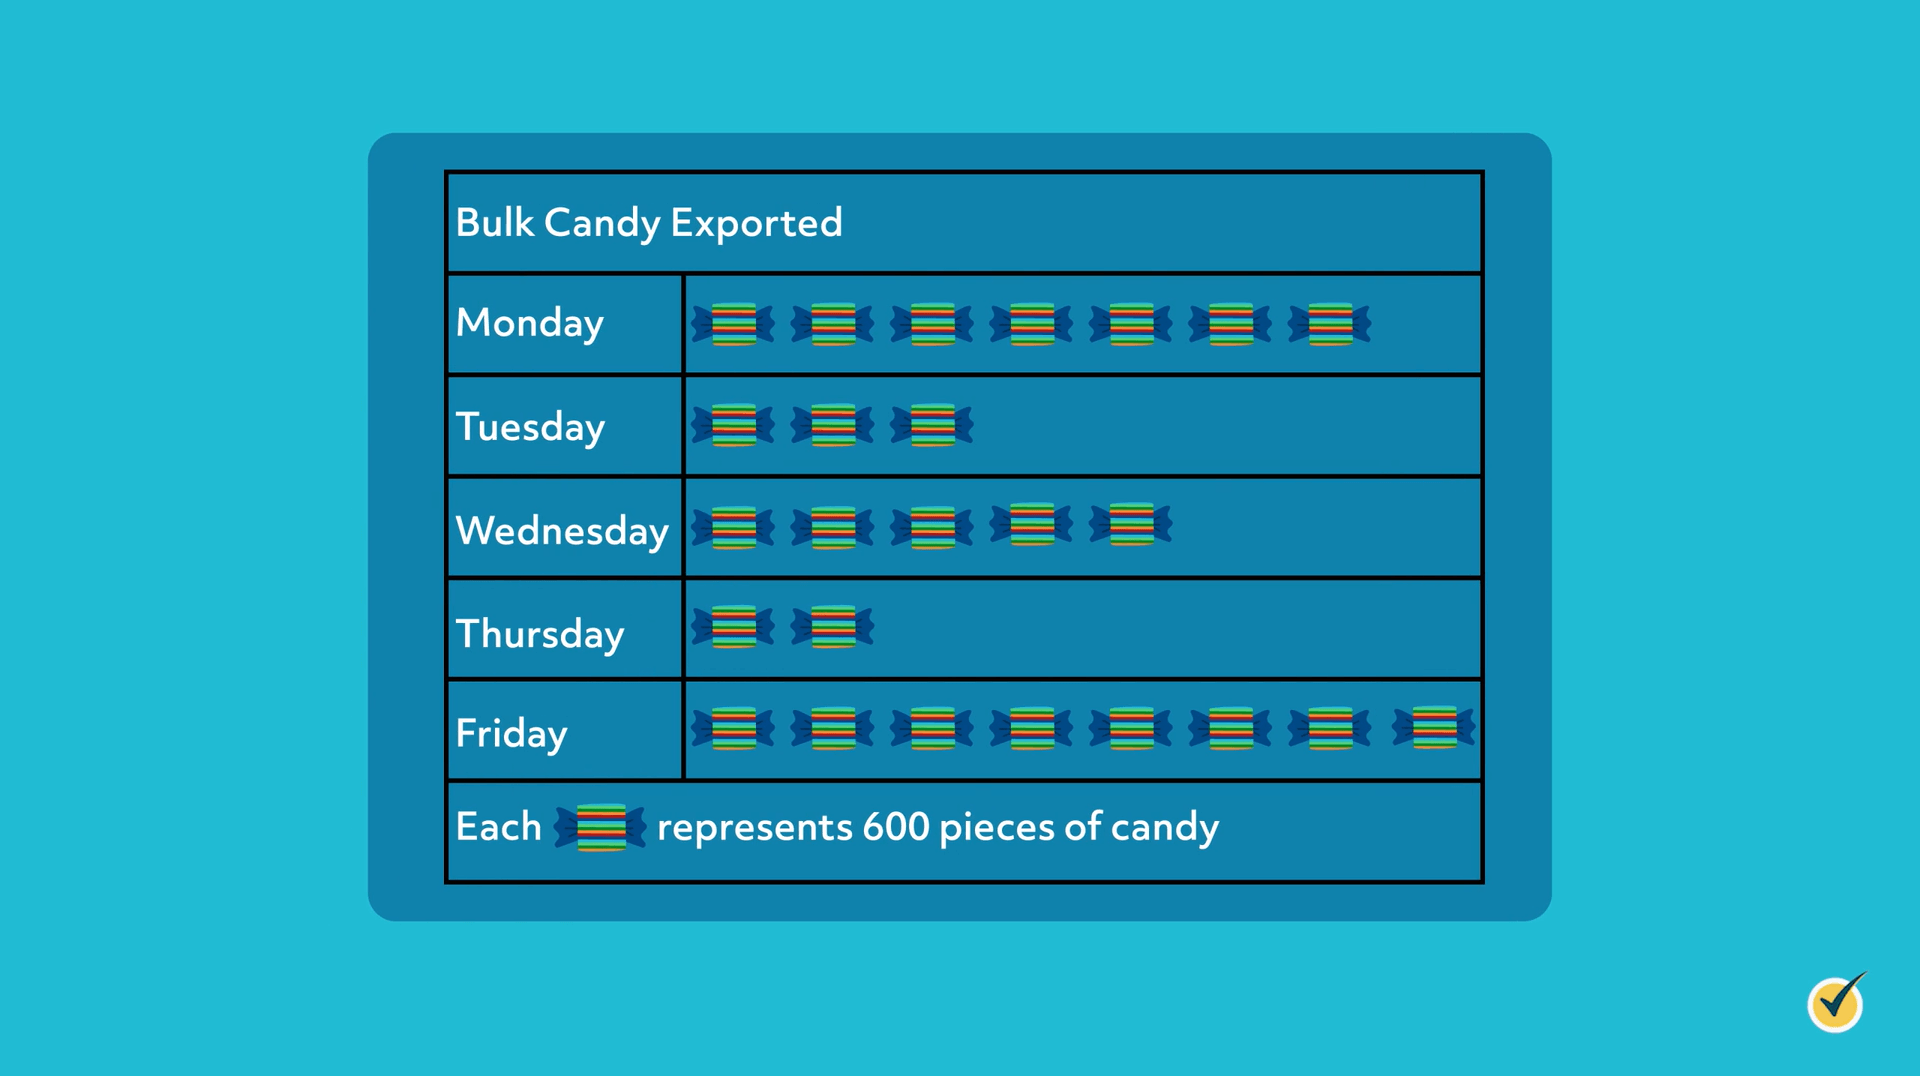 Pictograph of Bulk Candy Exported each day of the week, 7 symbols for Monday, 3 for Tuesday, 5 for Wednesday, 2 for Thursday, and 8 on Friday. 